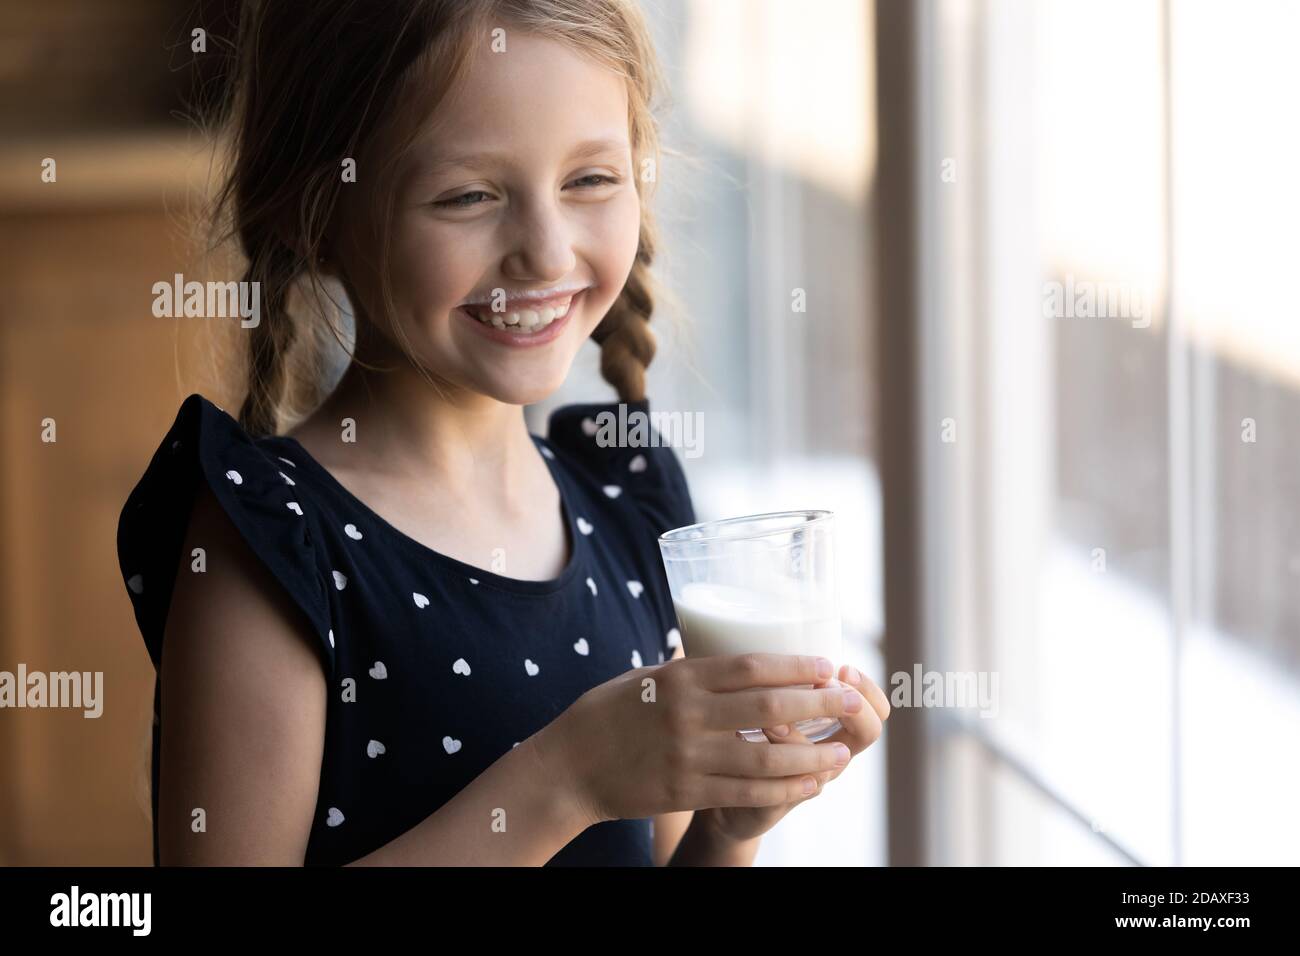 Naughty little girl standing by window drinking dairy from glass Stock Photo